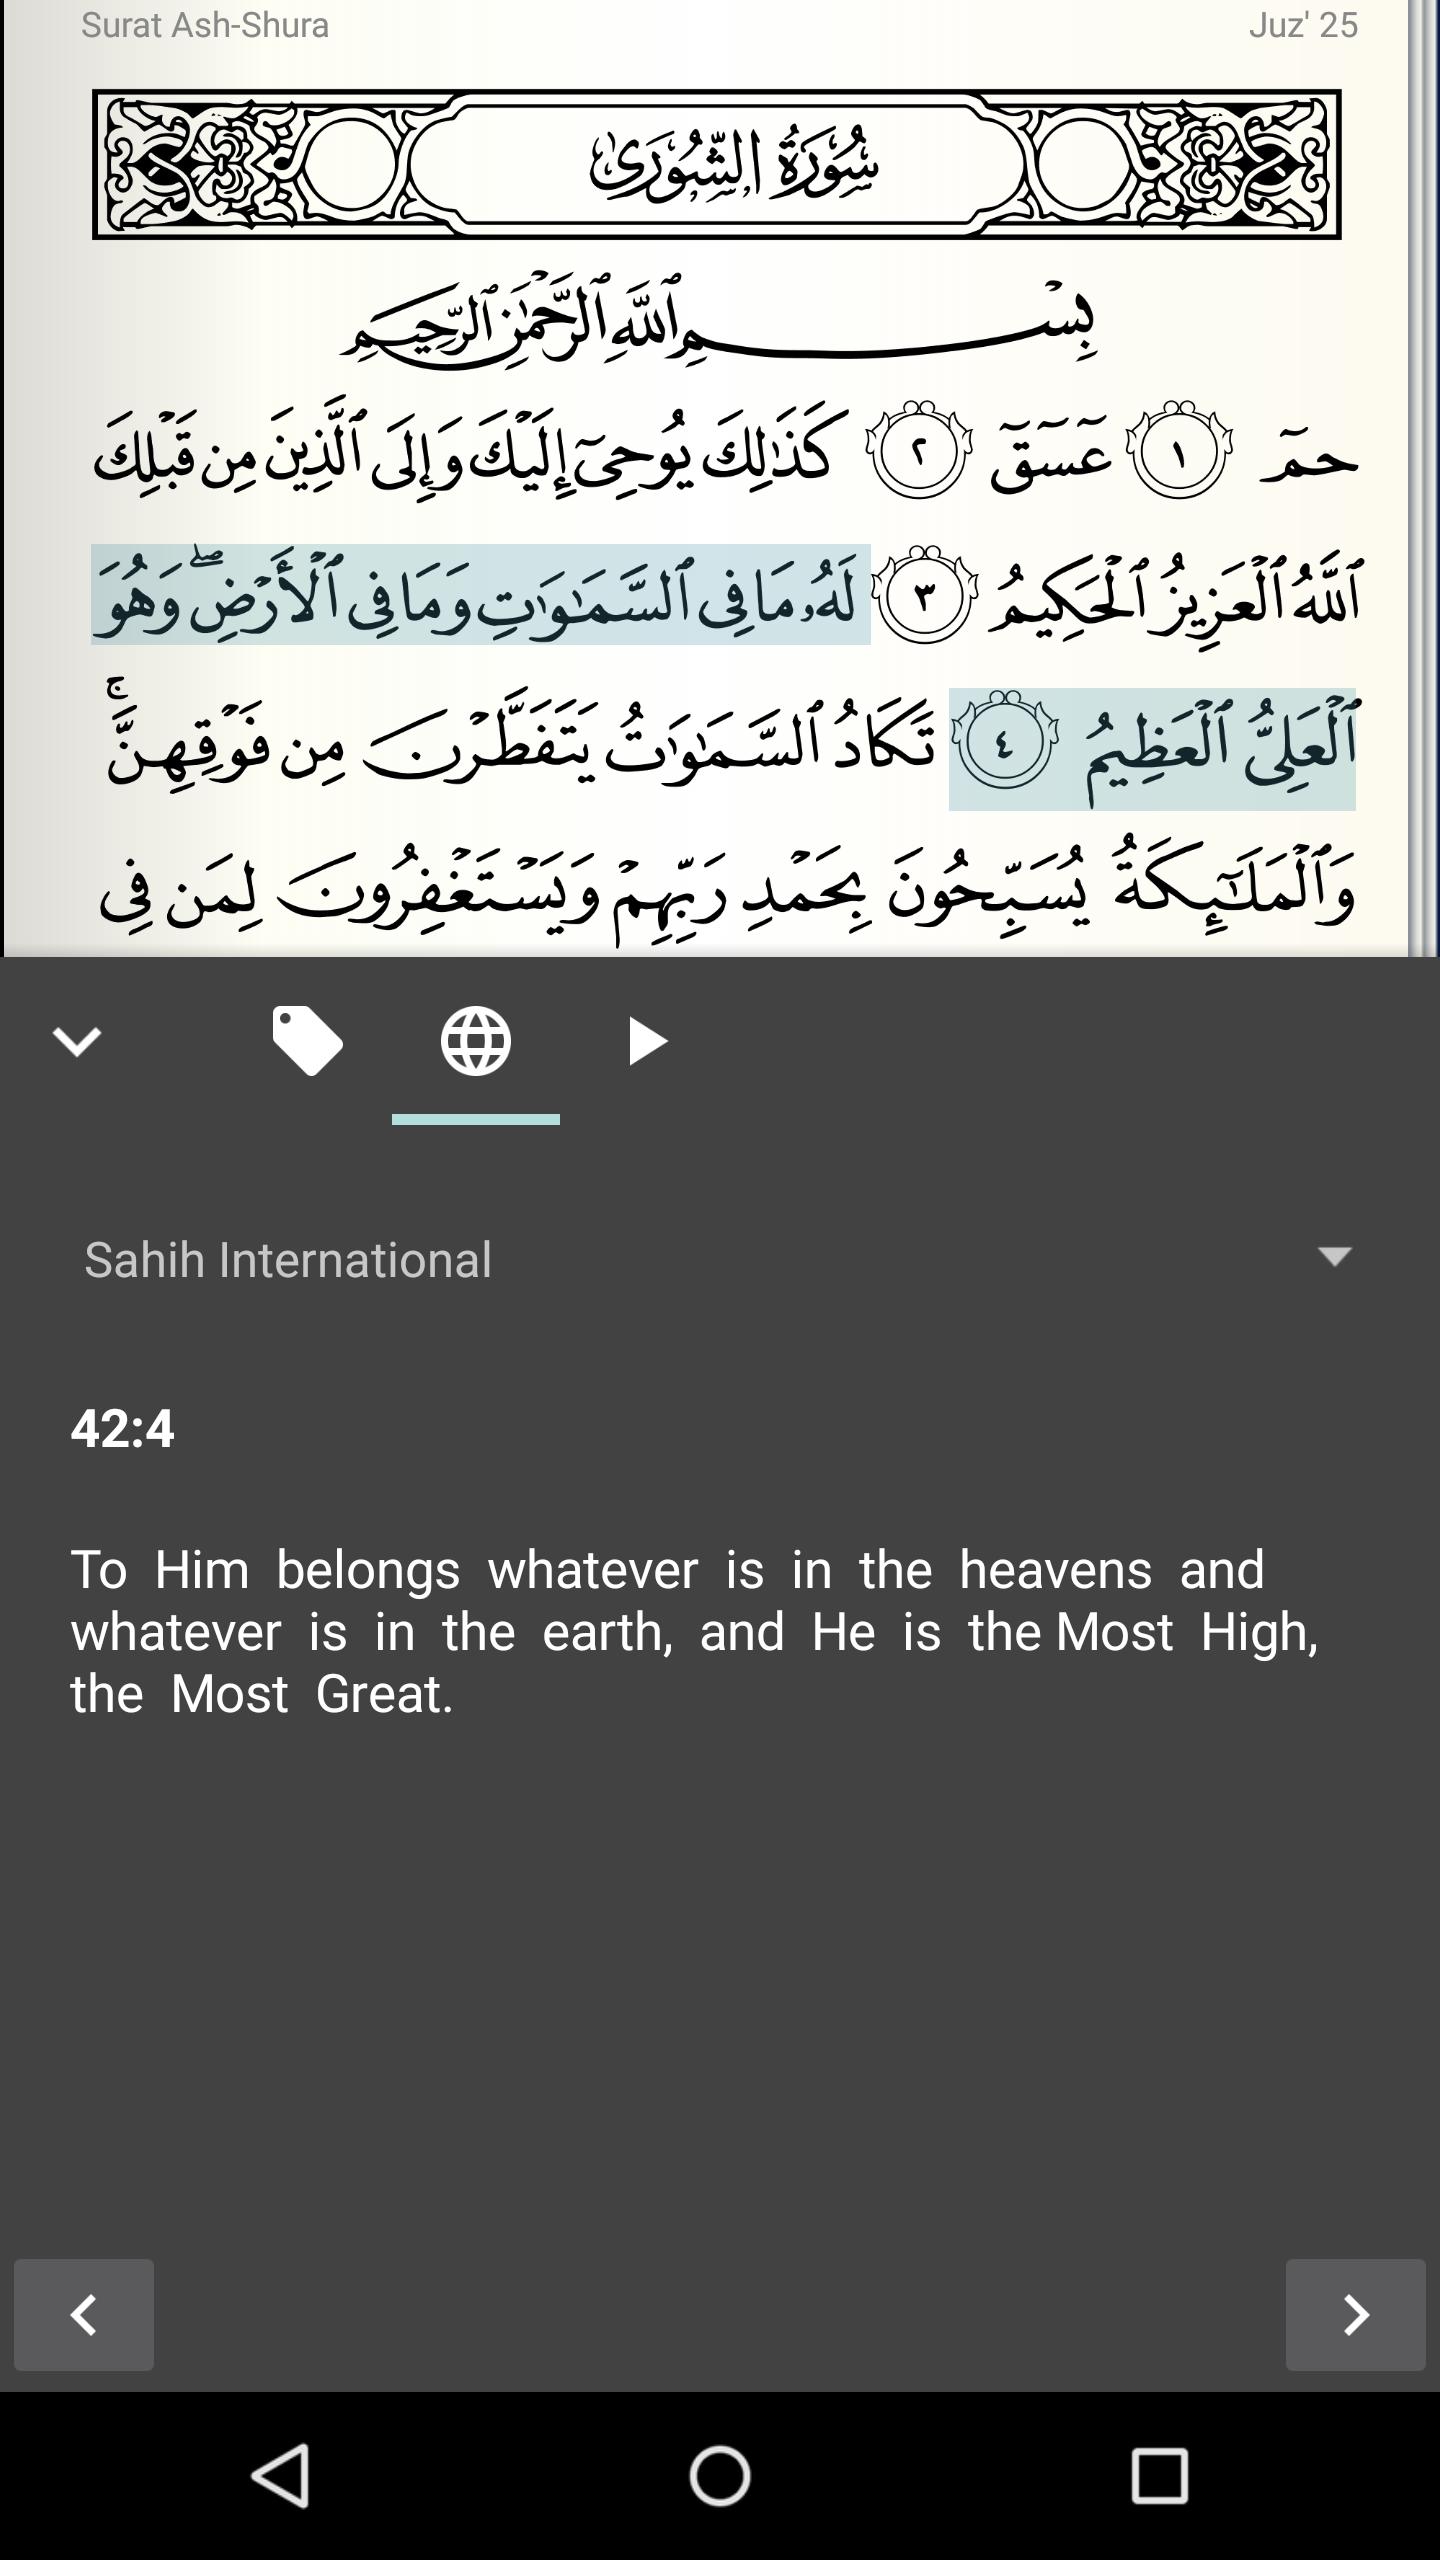 Quran for Android 3.0.2 Screenshot 5